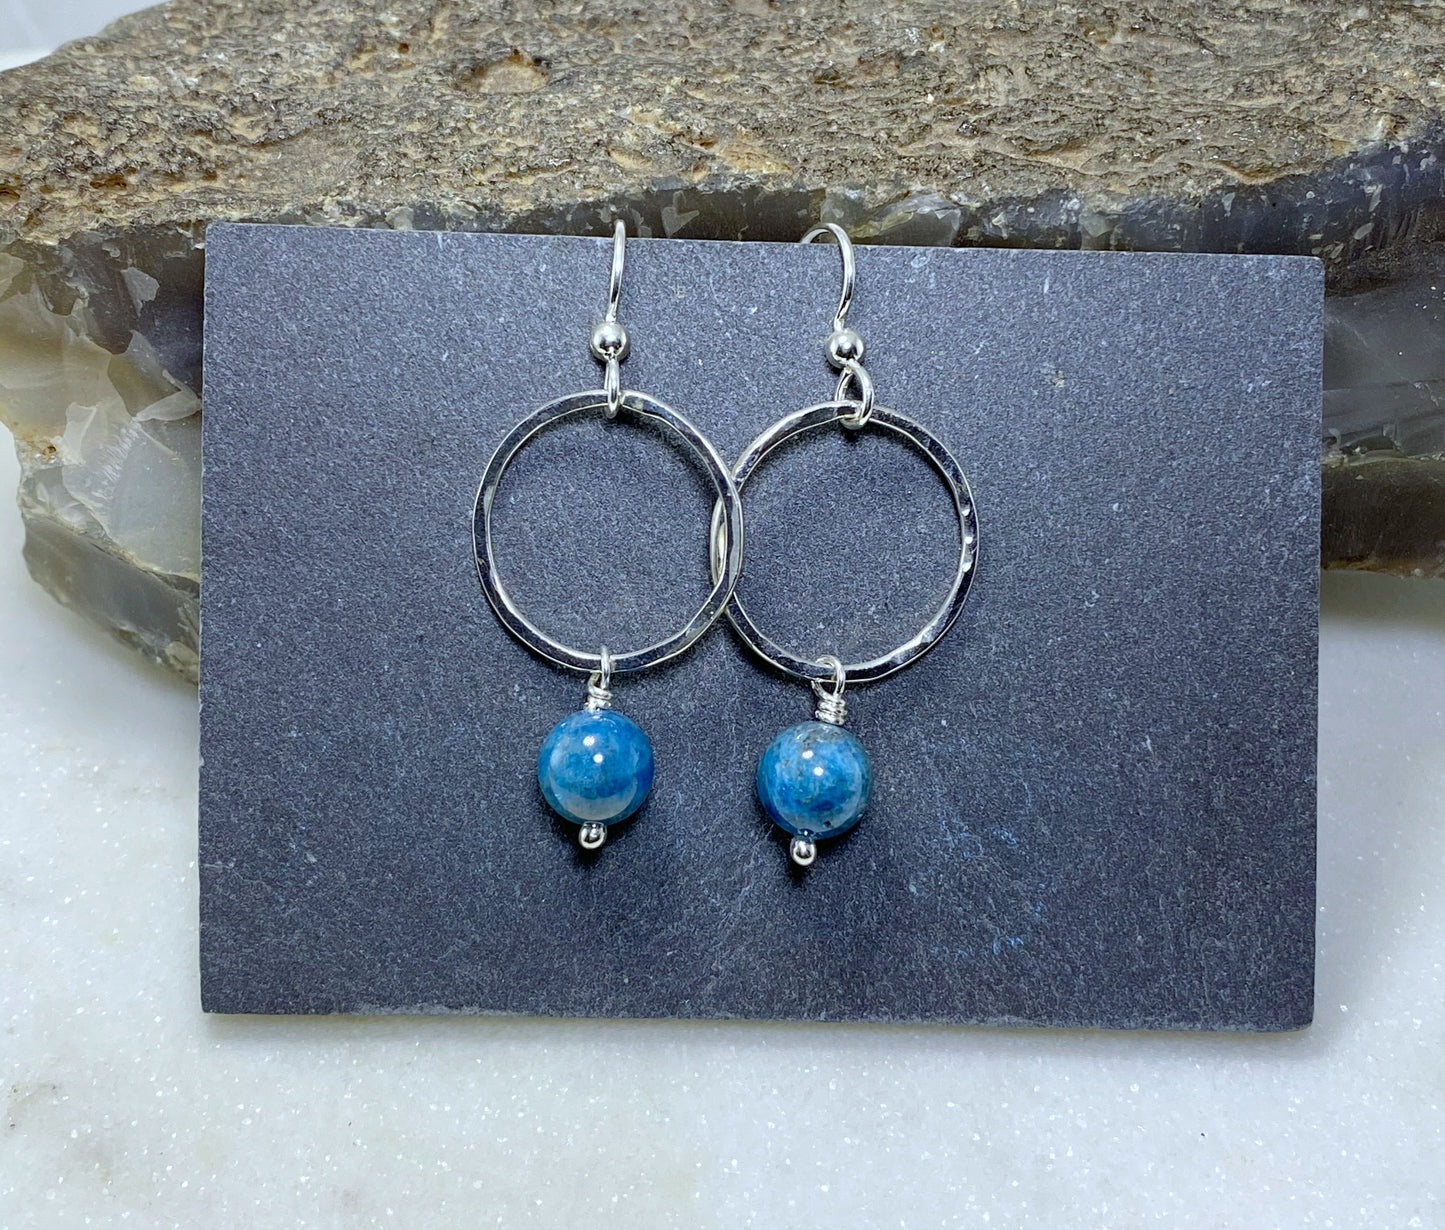 Sterling silver forged hoop earrings with apatite